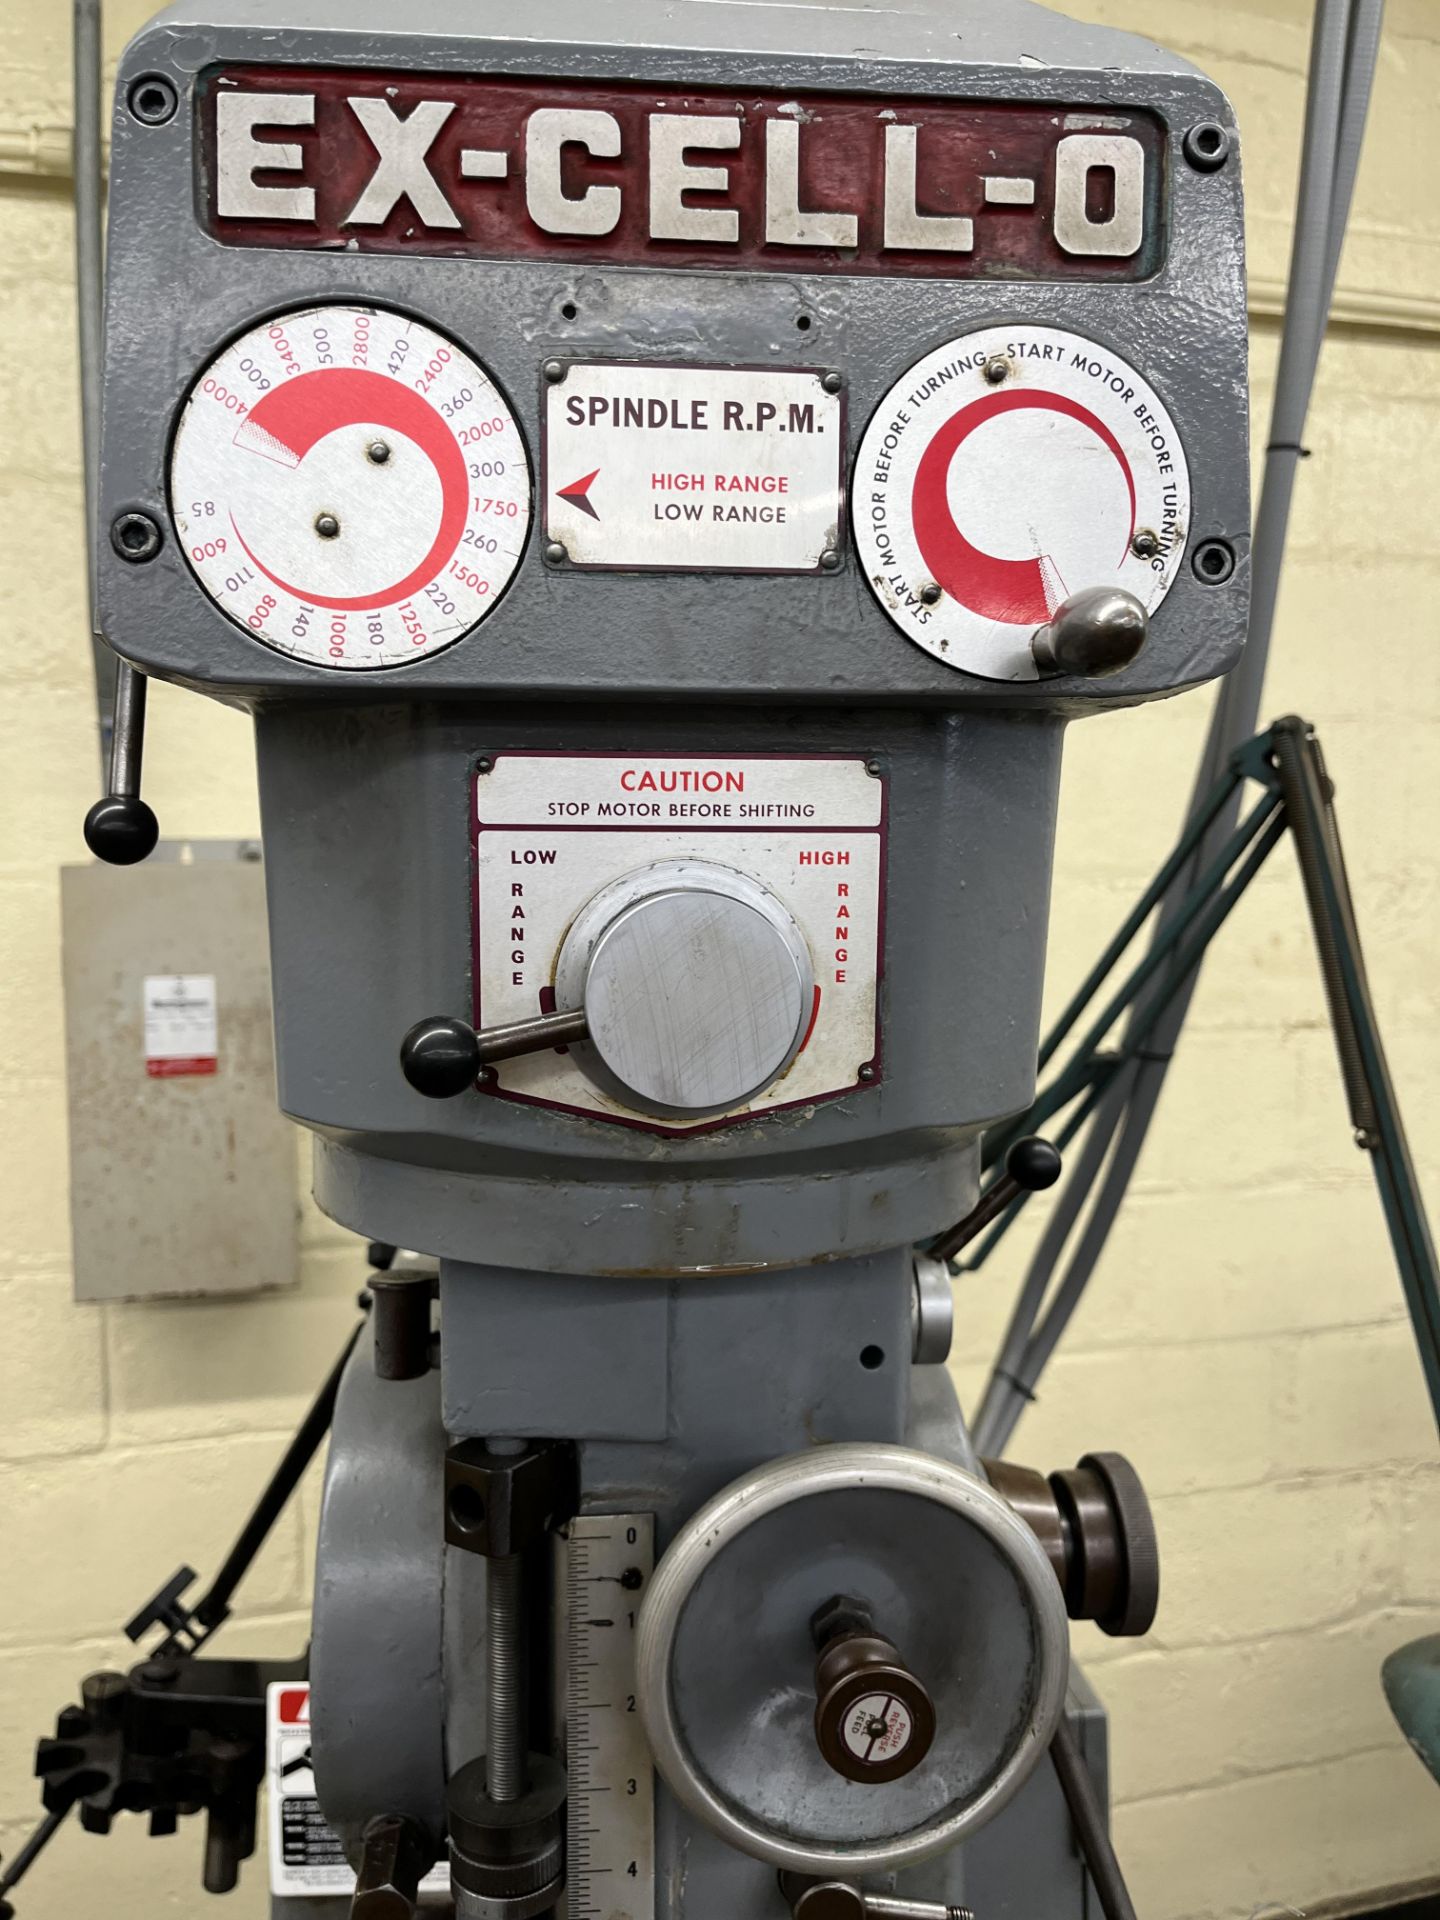 EX-CELL-O CORPORATION RAM TURRET MILLING MACHINE STYLE 602 SERIAL NO. 6026865 SPINDLE 460 VOLTS 2. - Image 7 of 8